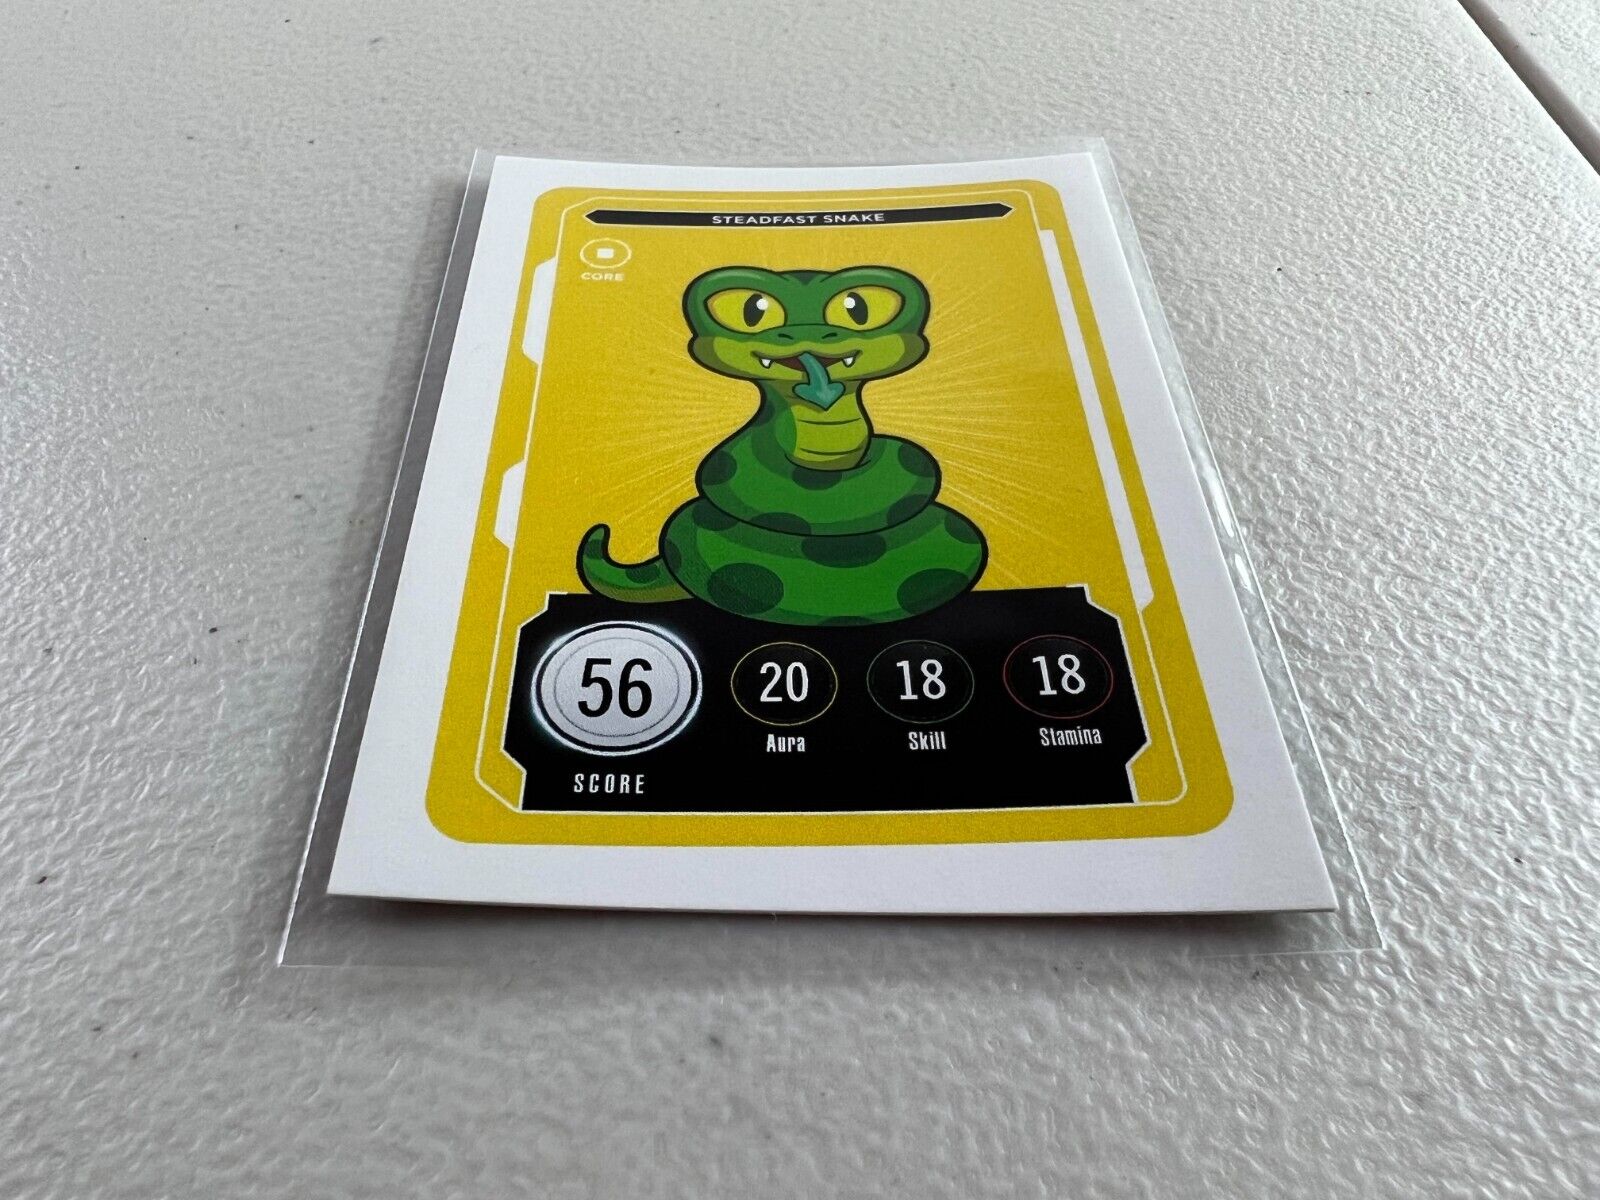 Steadfast Snake VeeFriends Series 2 Compete and Collect Core Card Gary Vee